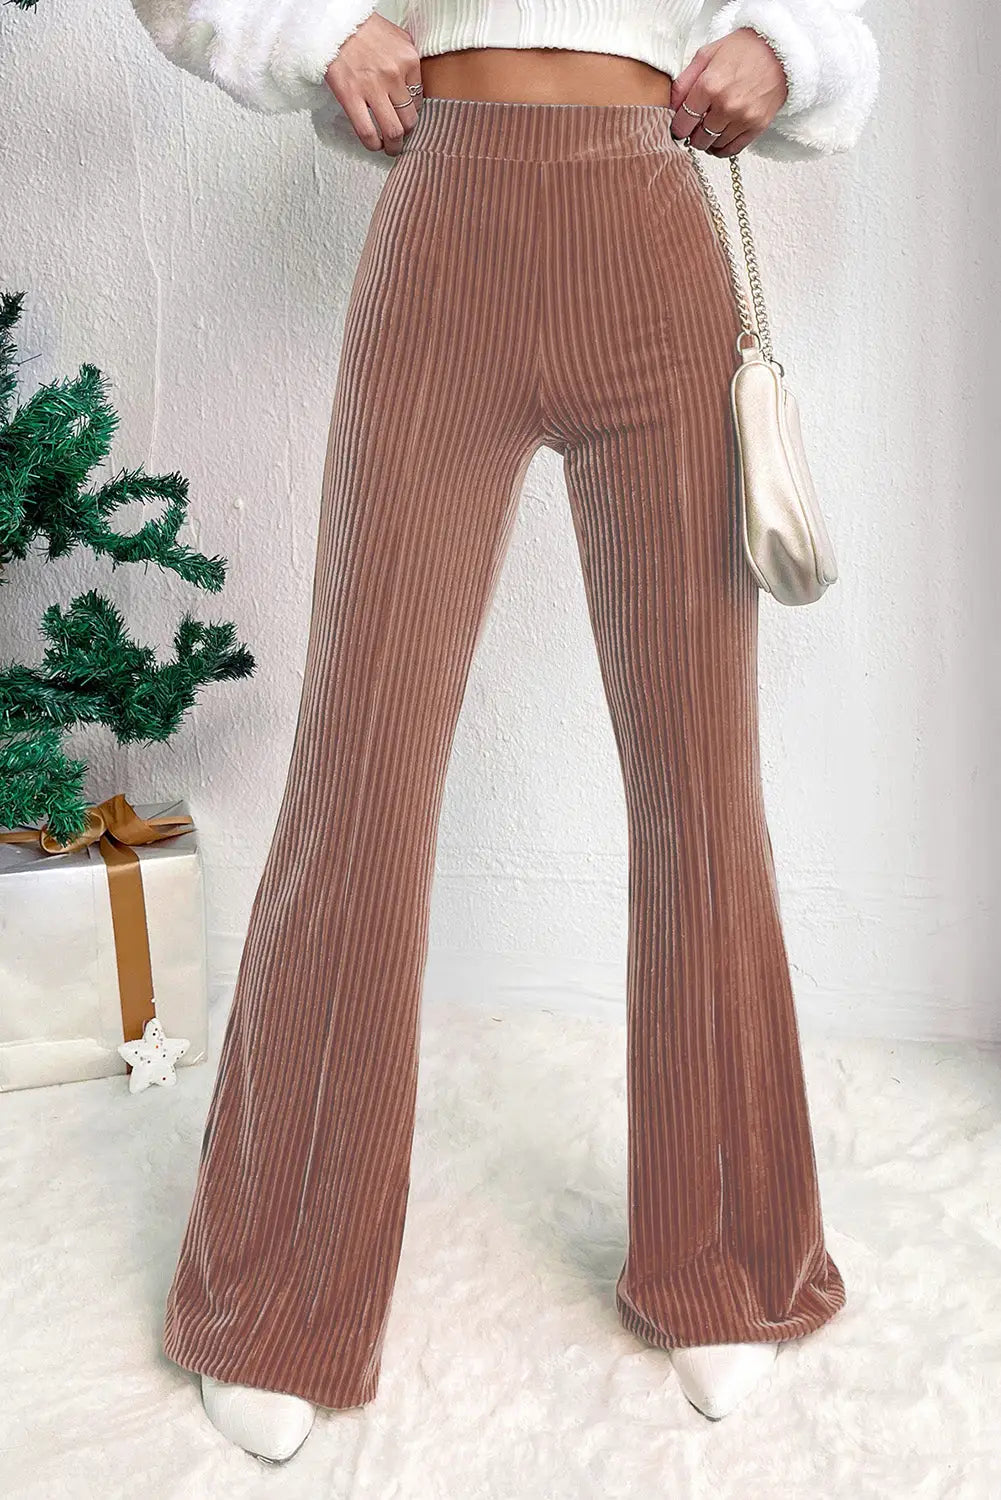 Dusty pink solid color high waist flare corduroy pants - s / 90% polyester + 10% elastane - bottoms